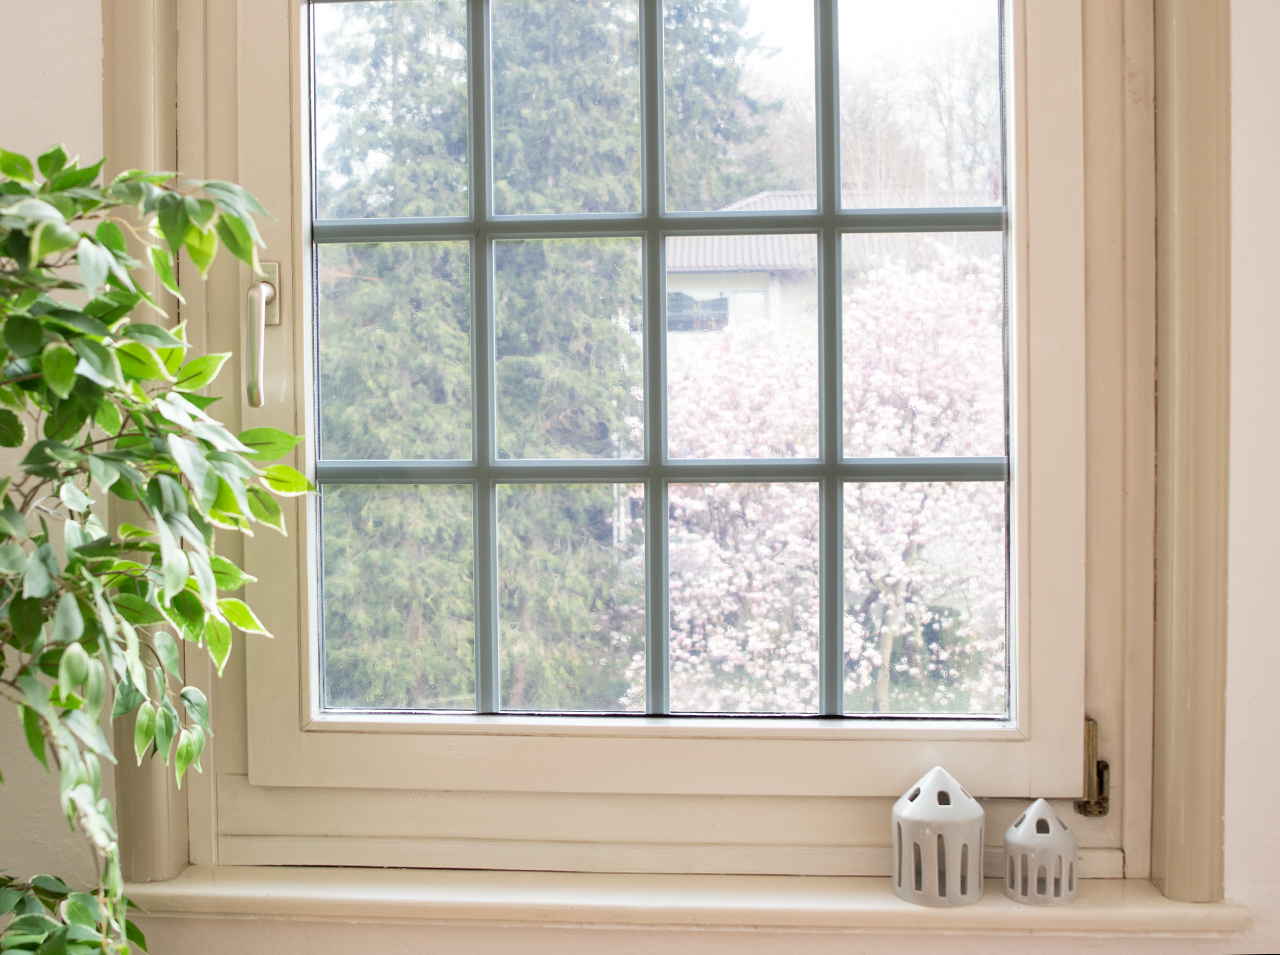 A window covered with d-c-fix® static sun protective film to effectively reduce solar radiation and heat build-up.